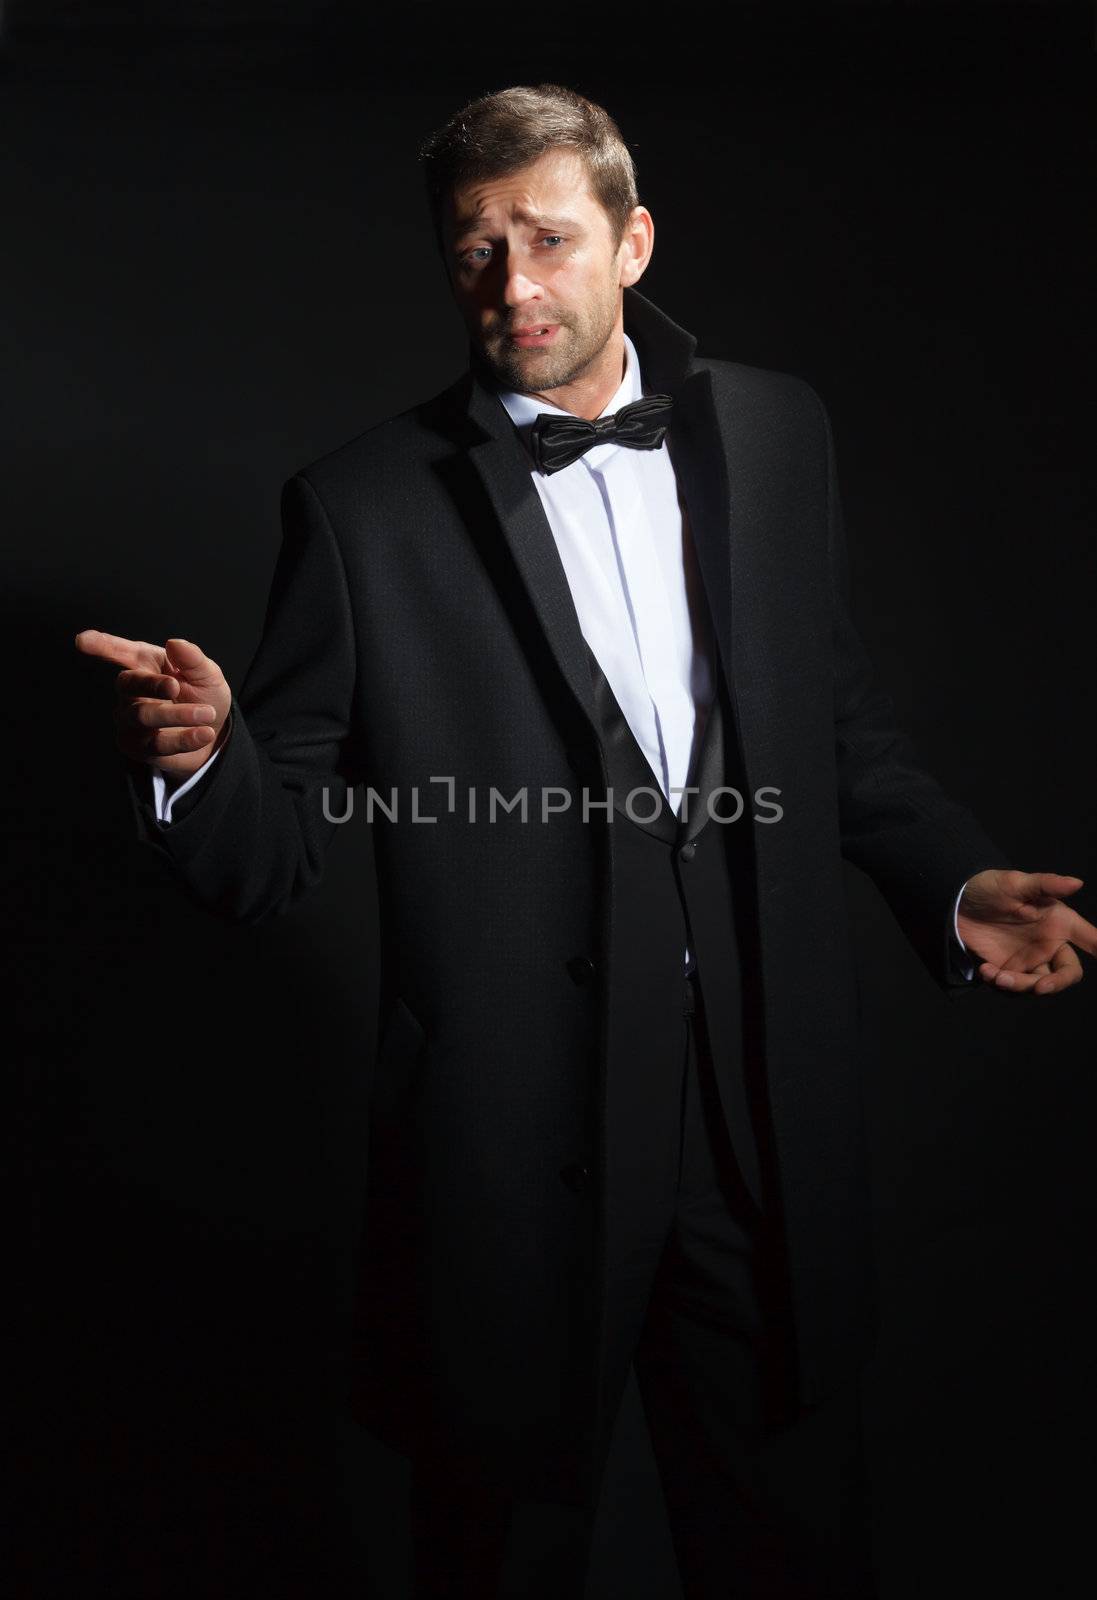 Handsome man in a tuxedo by Discovod